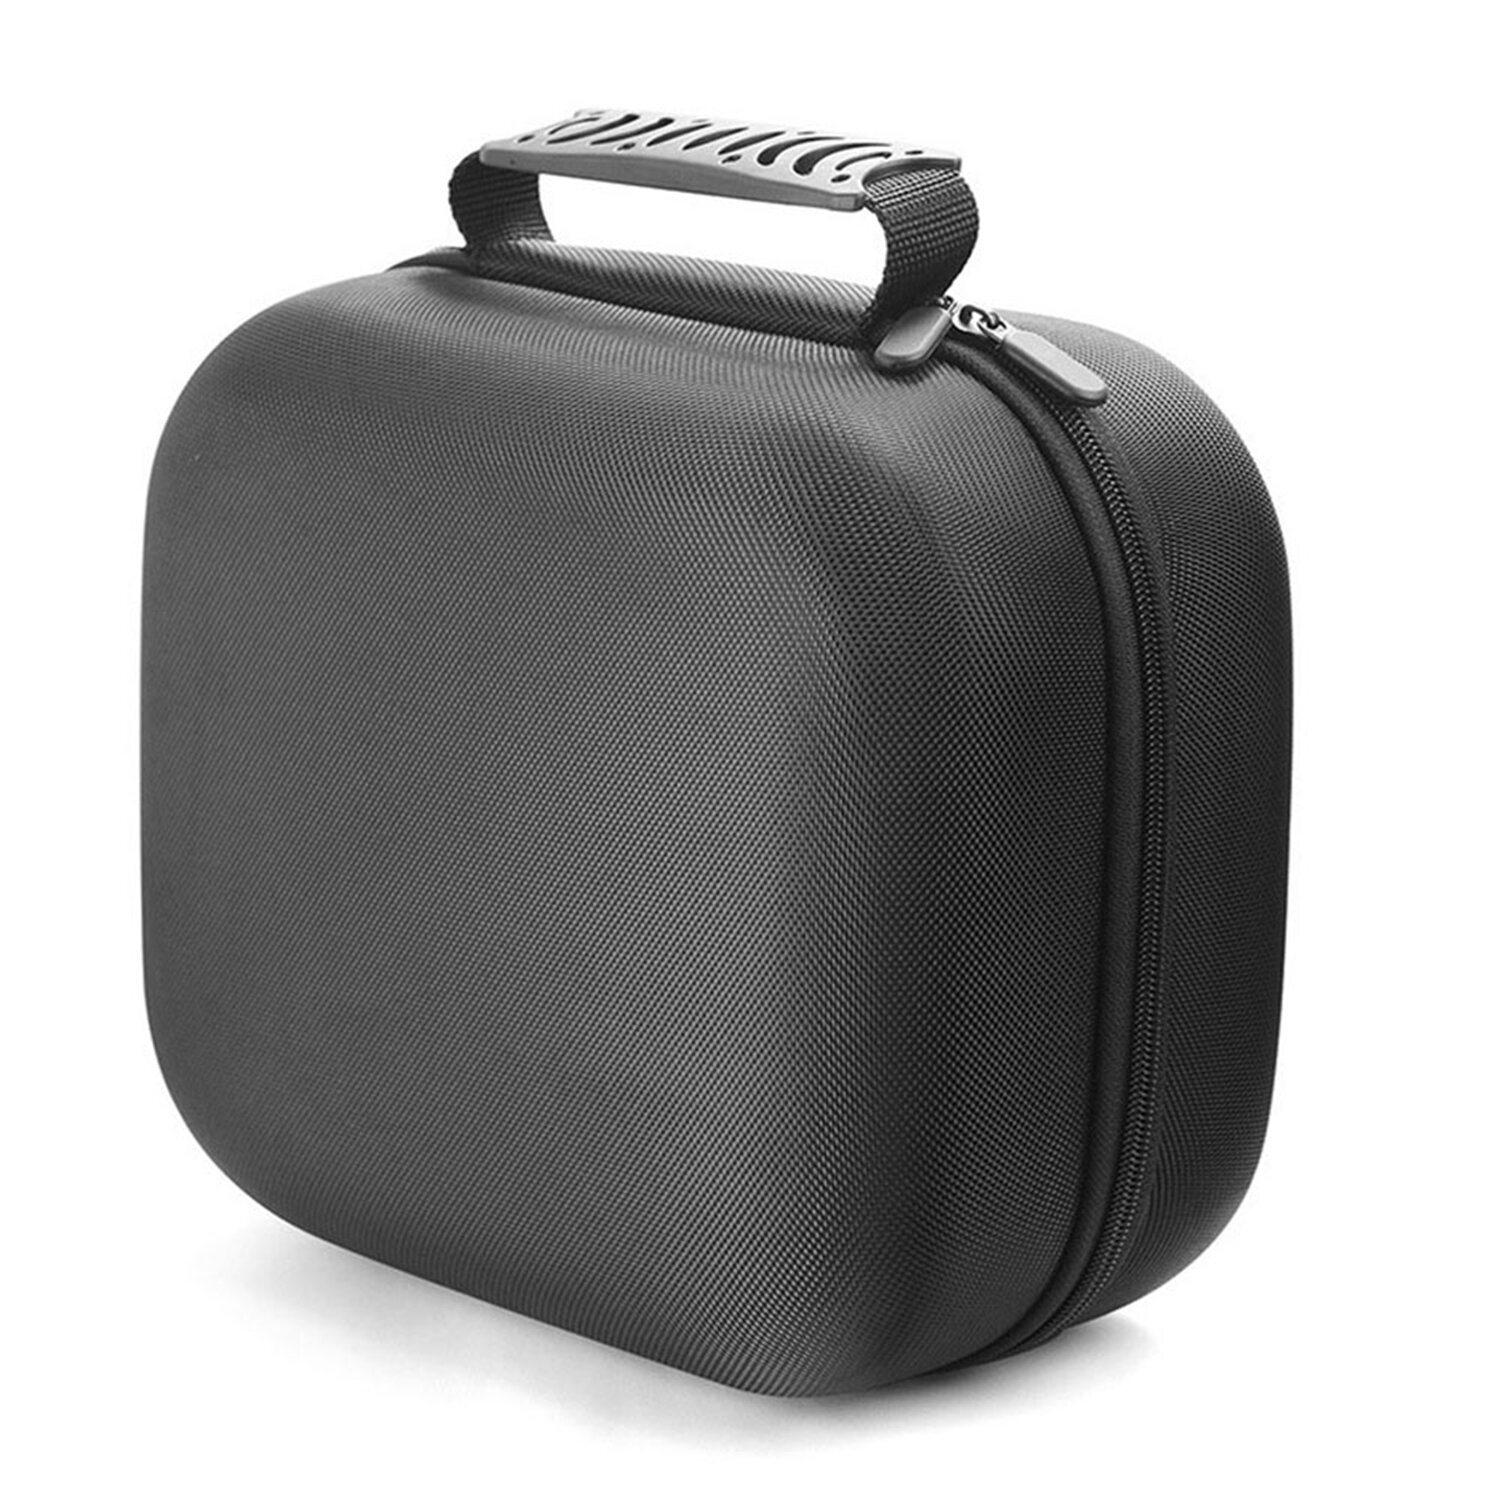 Bakeey Earphone Carrying Case Shockproof Hard Portable Headphone Storage Bag Protective Box for Beat